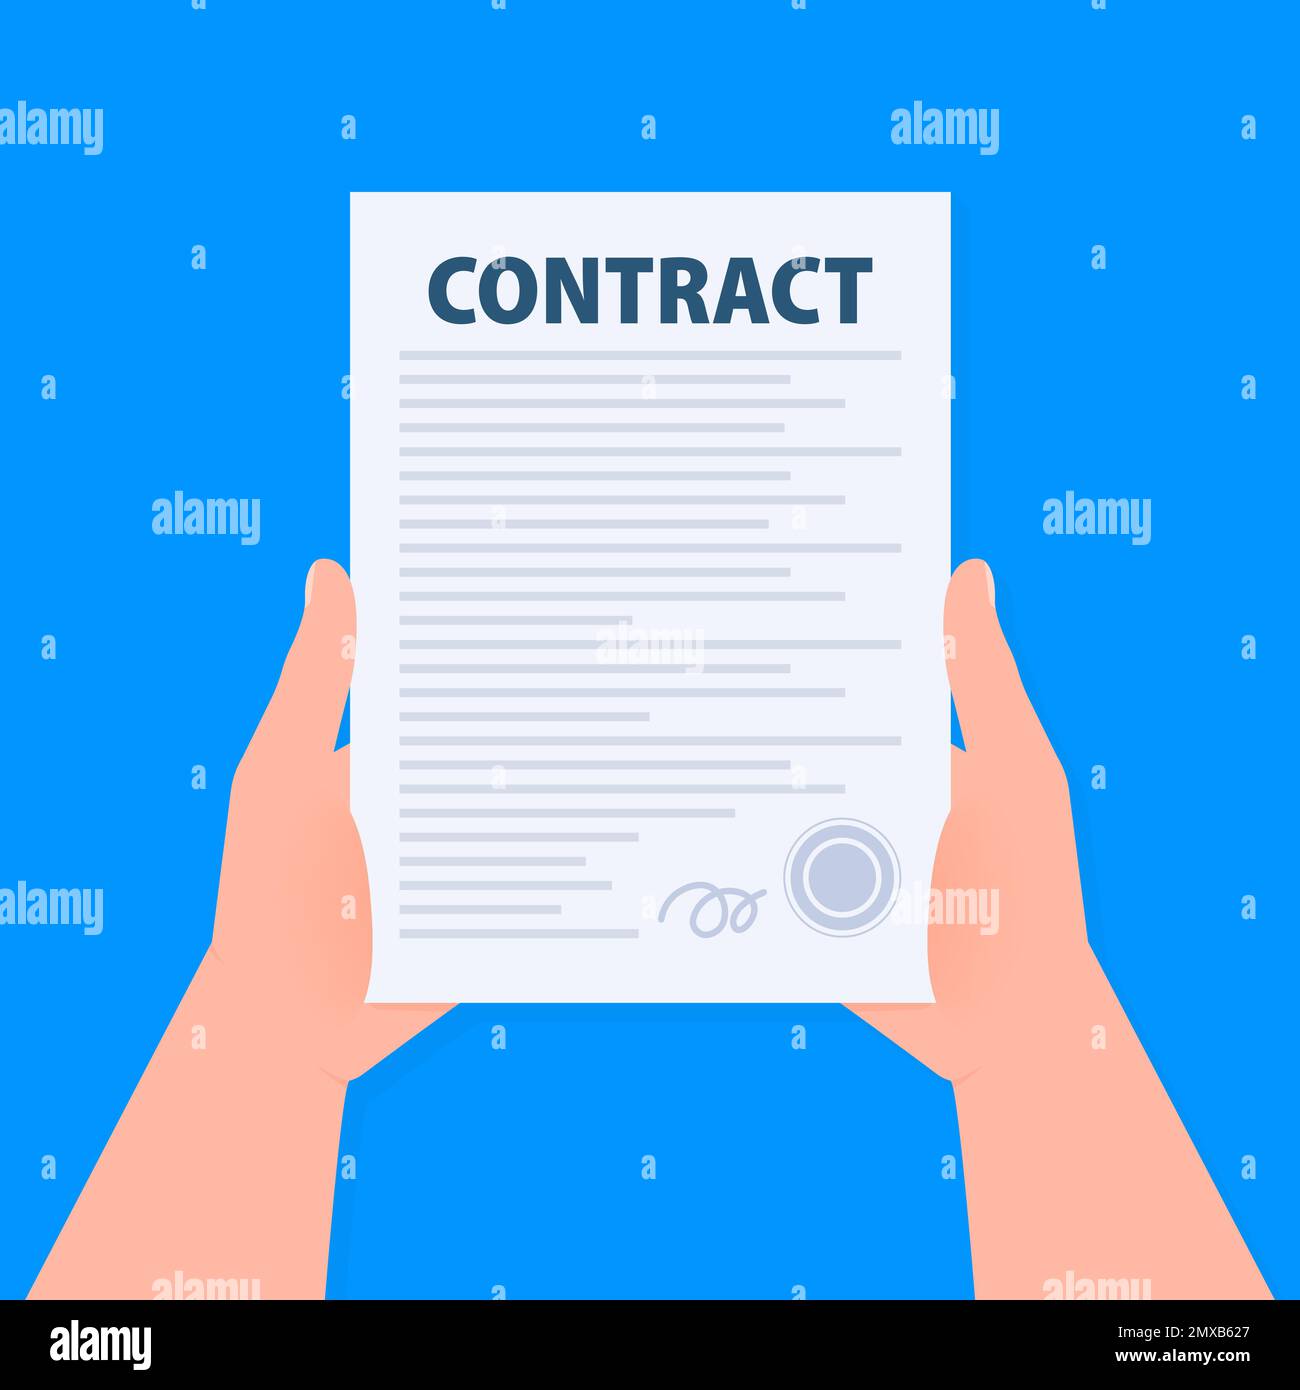 Contract document form. Sign contract. Vector illustration. Stock Vector